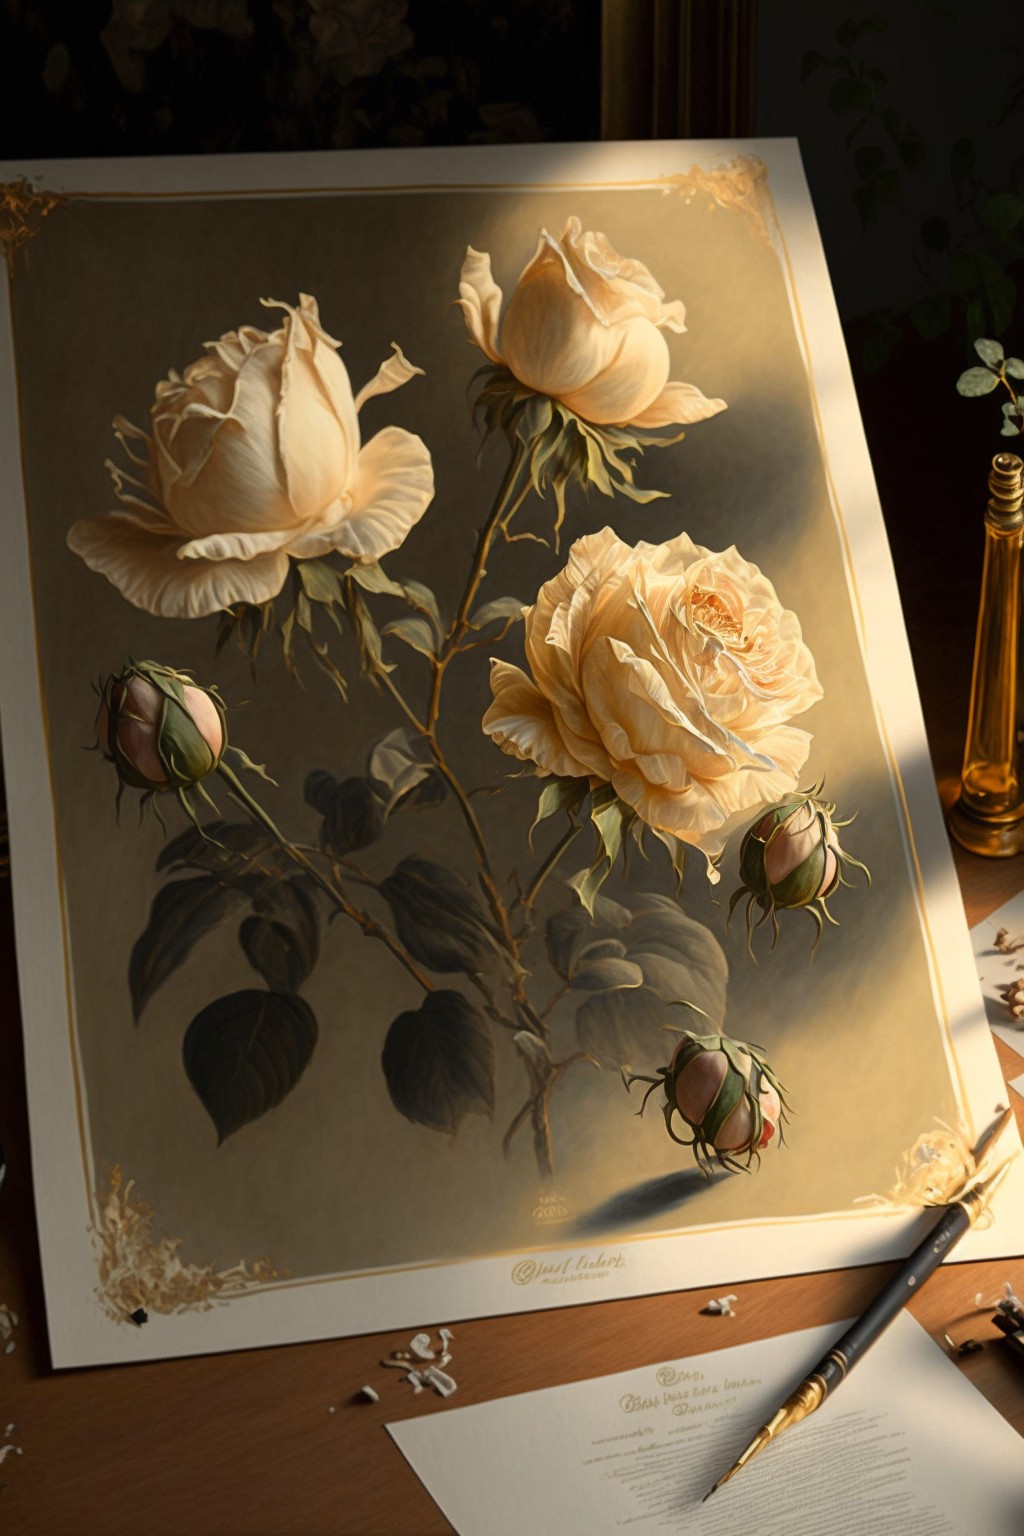 A delicate painting of roses